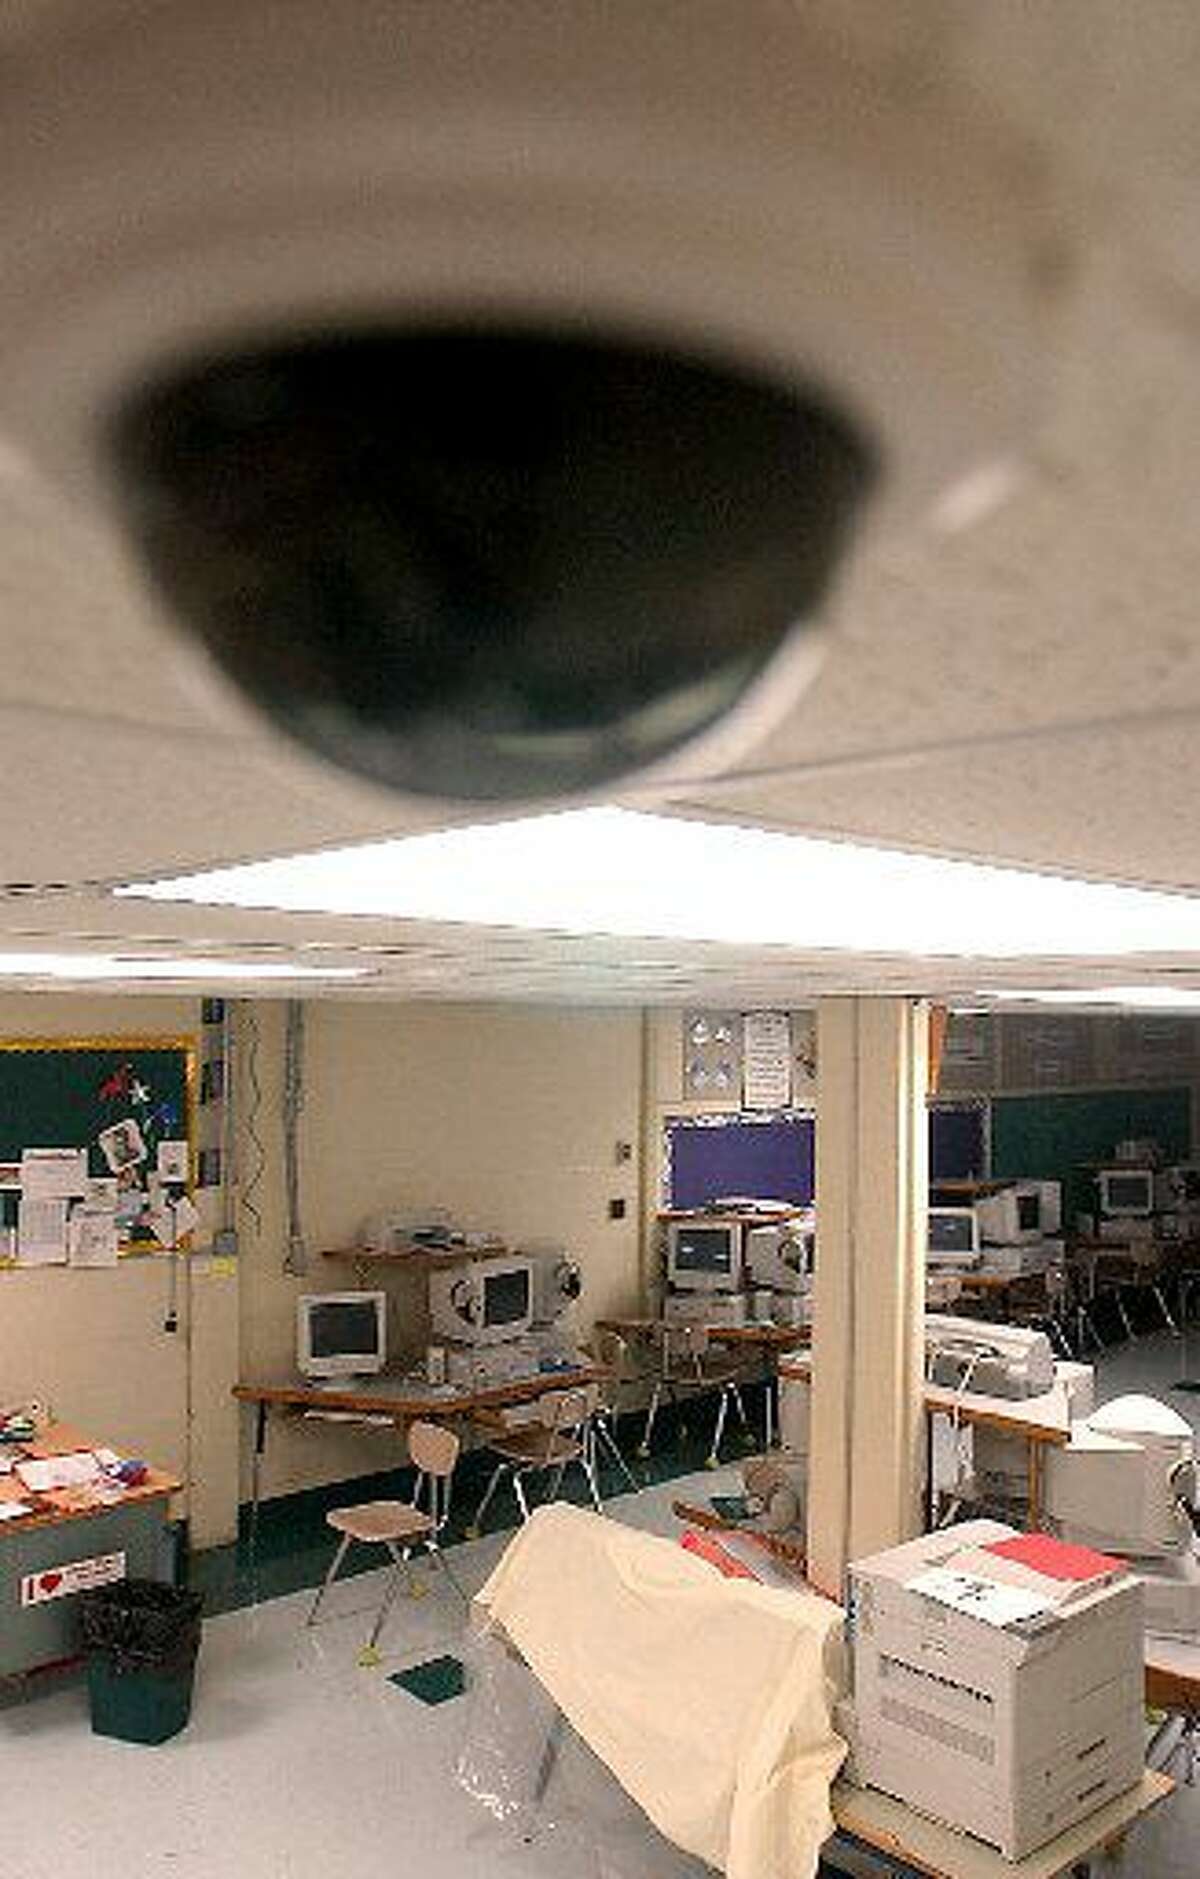 FILE-- With the start of the school year, students at all Biloxi, Miss. schools will have cameras in the room and halls of the schools. The computer lab at Beauvoir Elementary School in Biloxi, seen Tuesday, Aug. 12, 2003, has two cameras to monitor the schoolroom. Beginning this school year, Senate Bill 507 requires Texas school districts to install, operate and maintain video cameras and video-audio recording equipment in some special education classrooms if a parent, trustee or staff member requests it. (AP Photo/The Sun Herald, Tim Isbell)